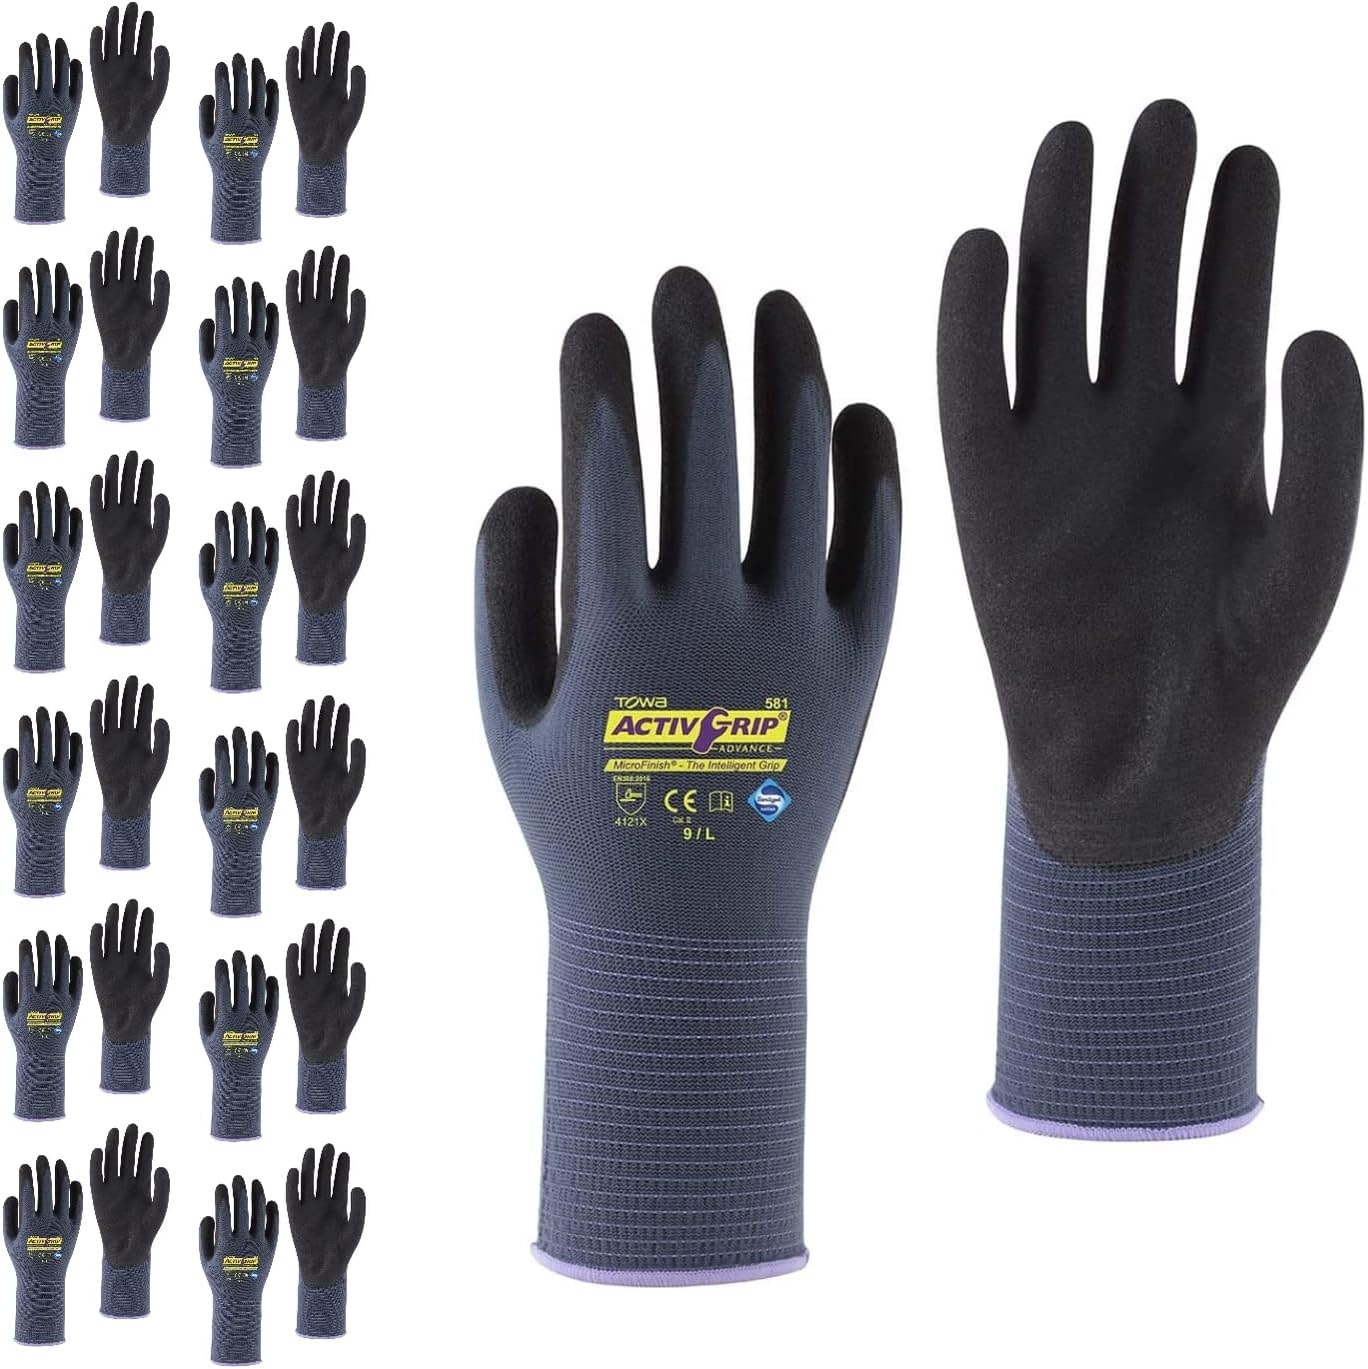 Machine-Knit ActivGrip Gloves, Coated, 12-Pack